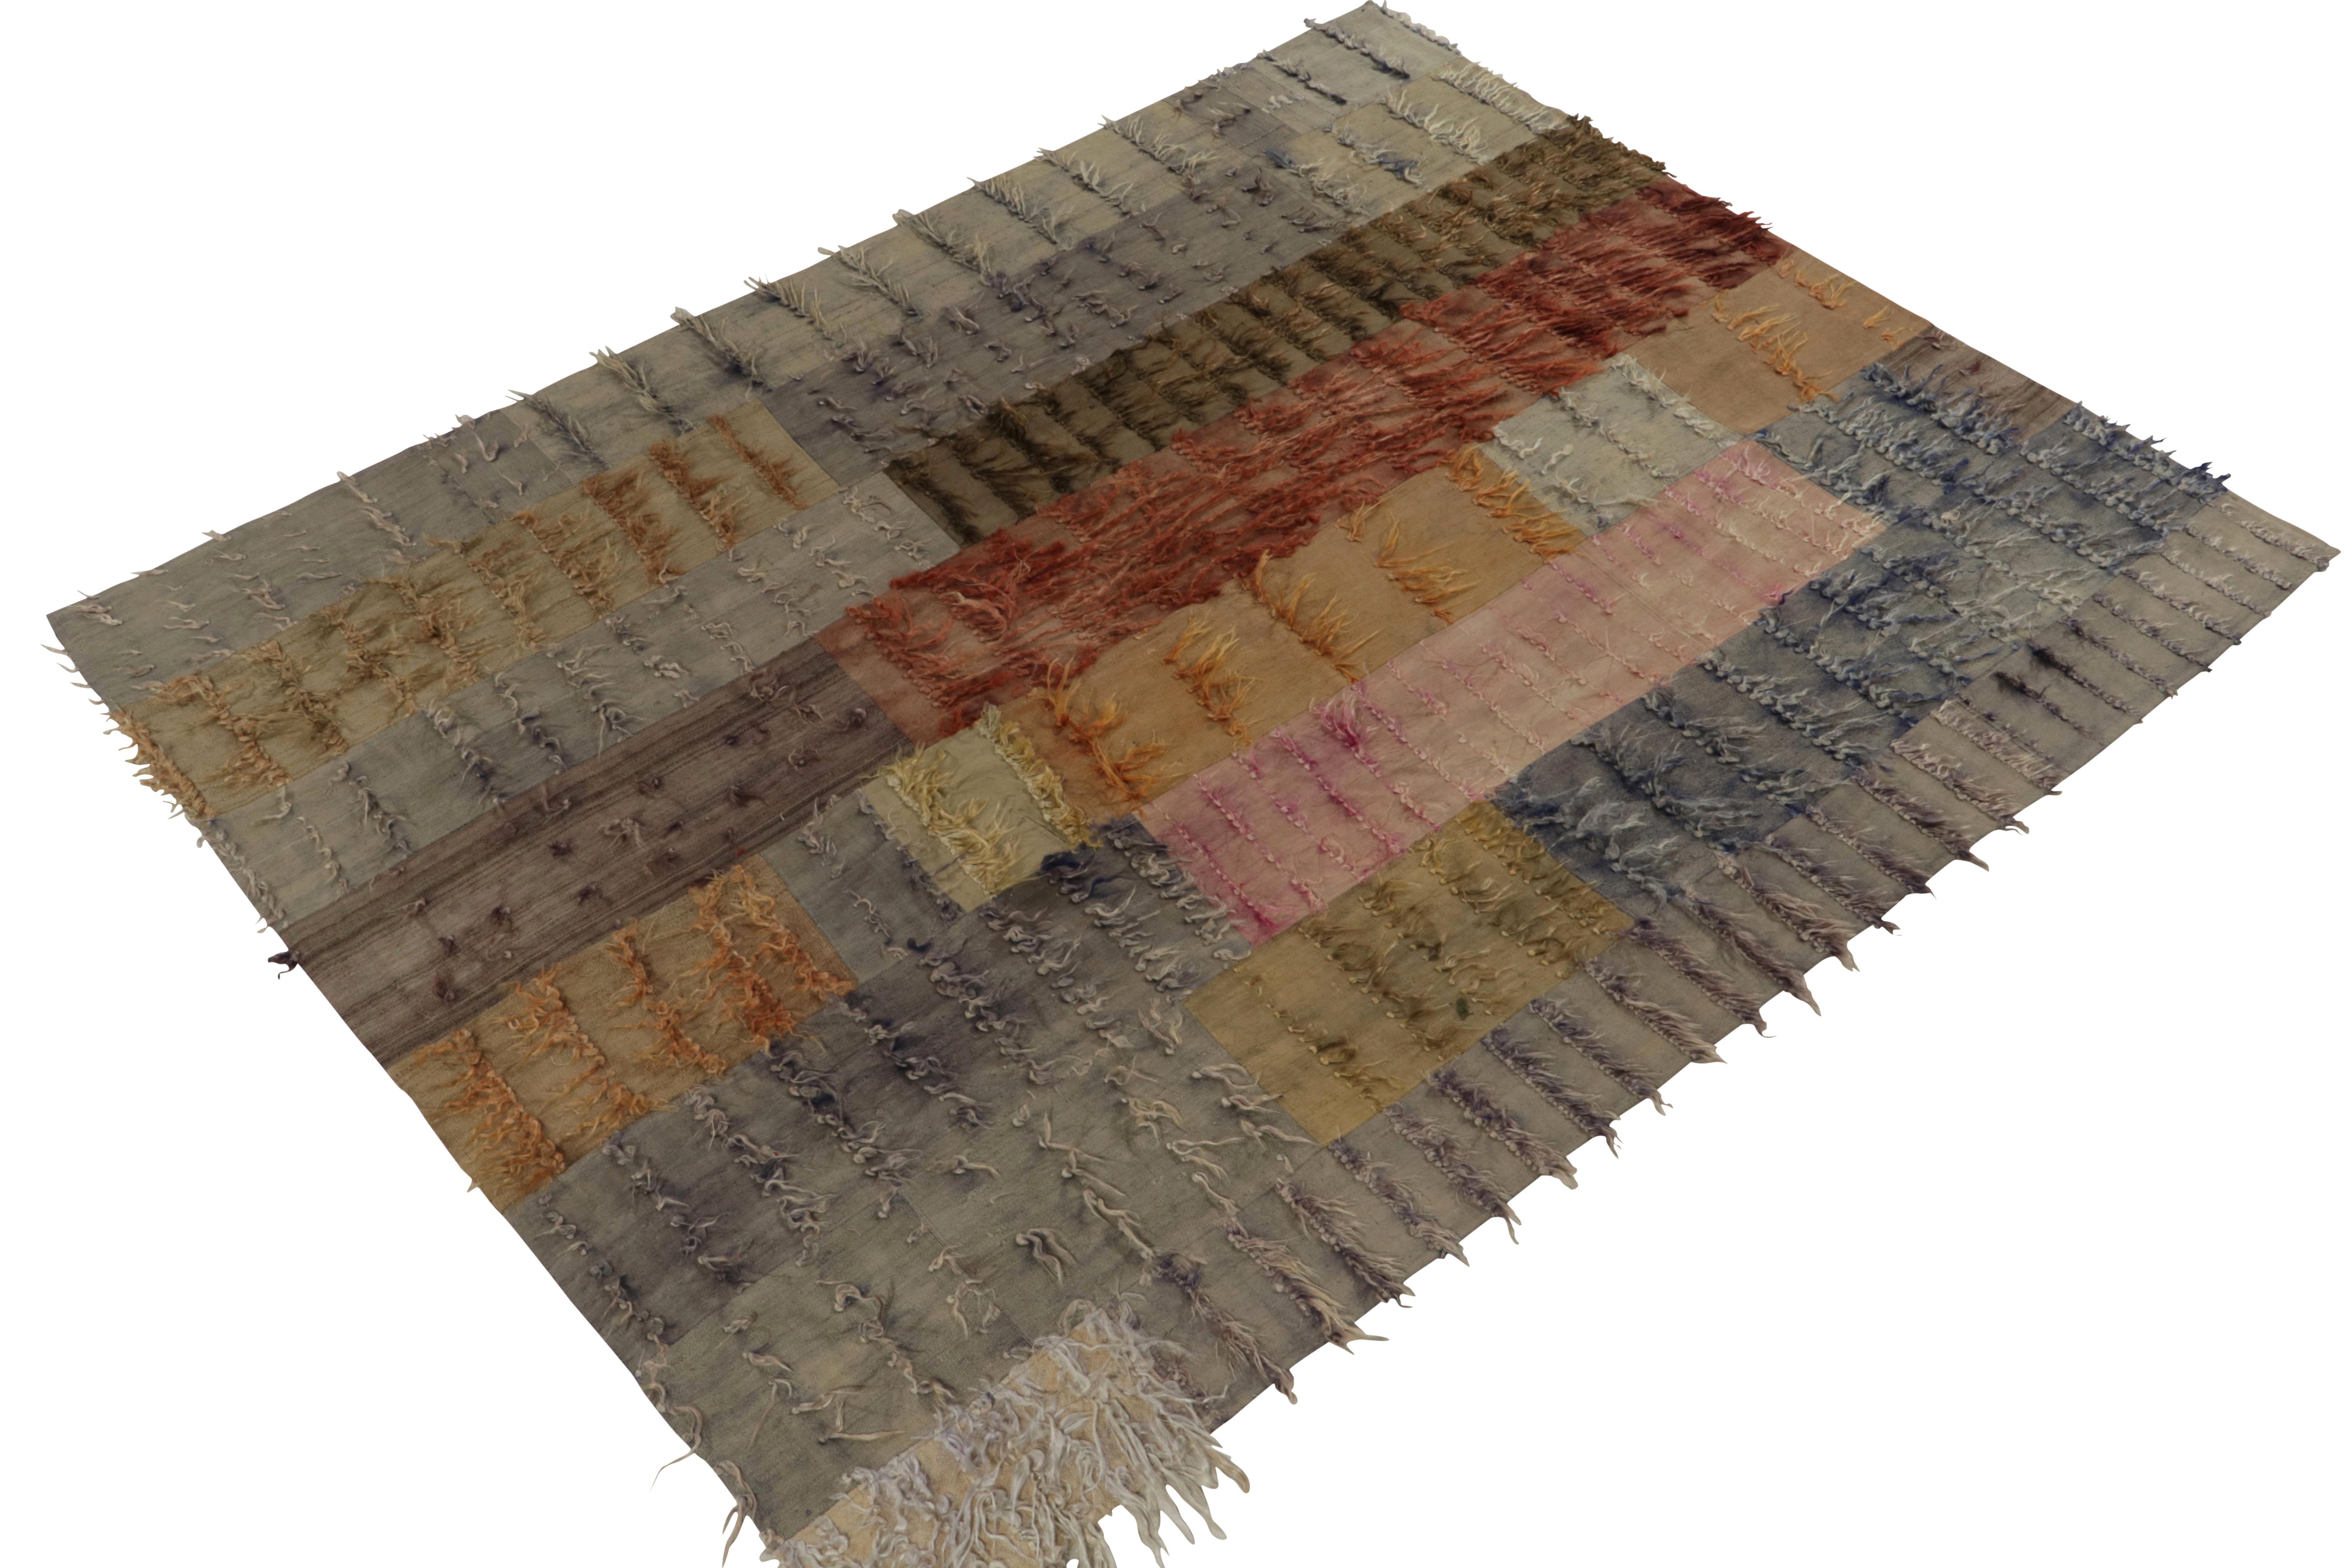 Hand knotted with wool n a rich and teeming angora yarn originating from Turkey between 1950-1960, this vintage midcentury Tulu rug enjoys a whimsical variety of textural high-low pile and smoothness in the play of the geometry and vibrant colorway.